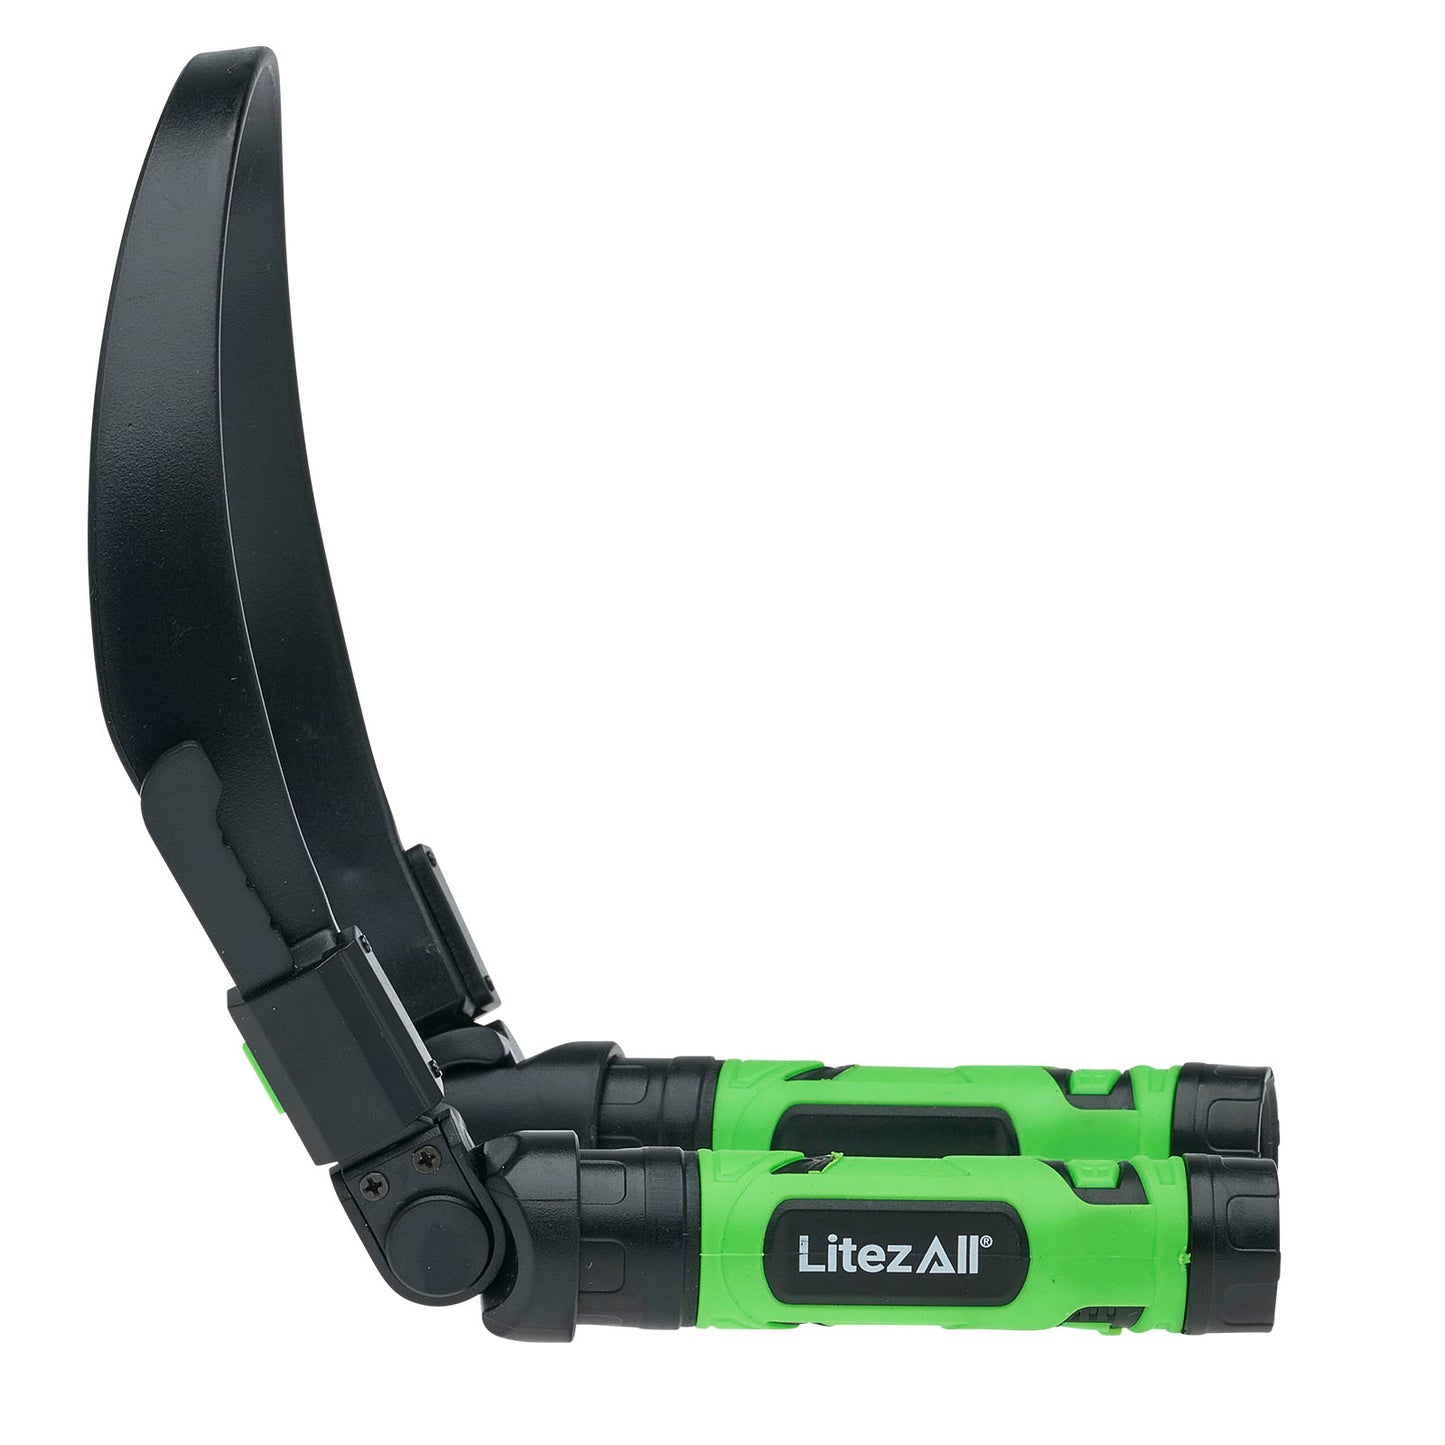 LitezAll 25515 Rechargeable Neck Torch with 10 Locking Positions